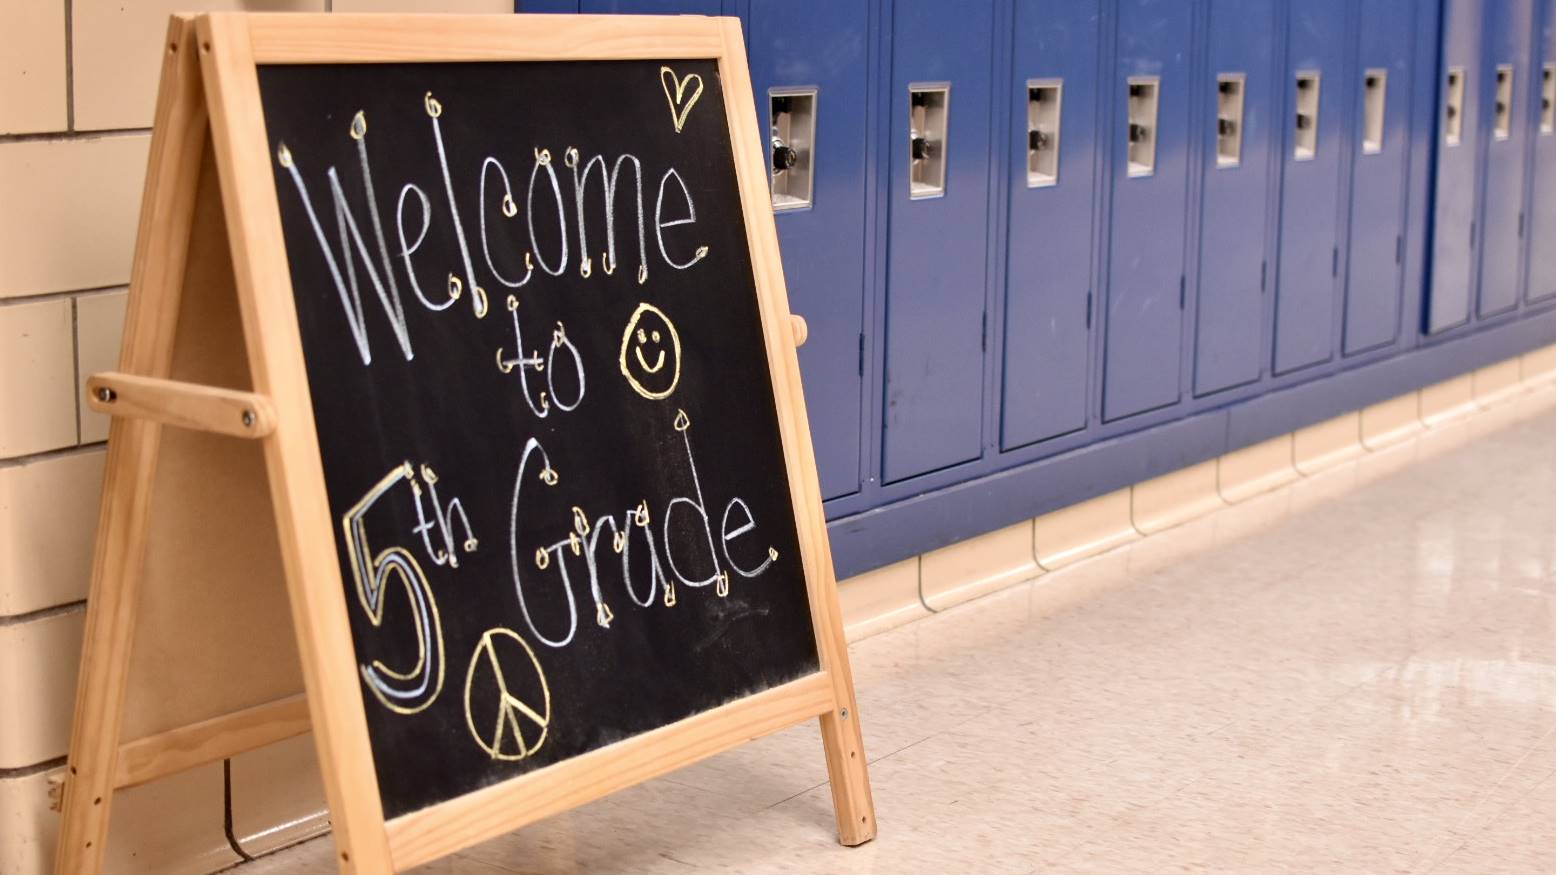 Sign in hallway that says "Welcome to 5th Grade"